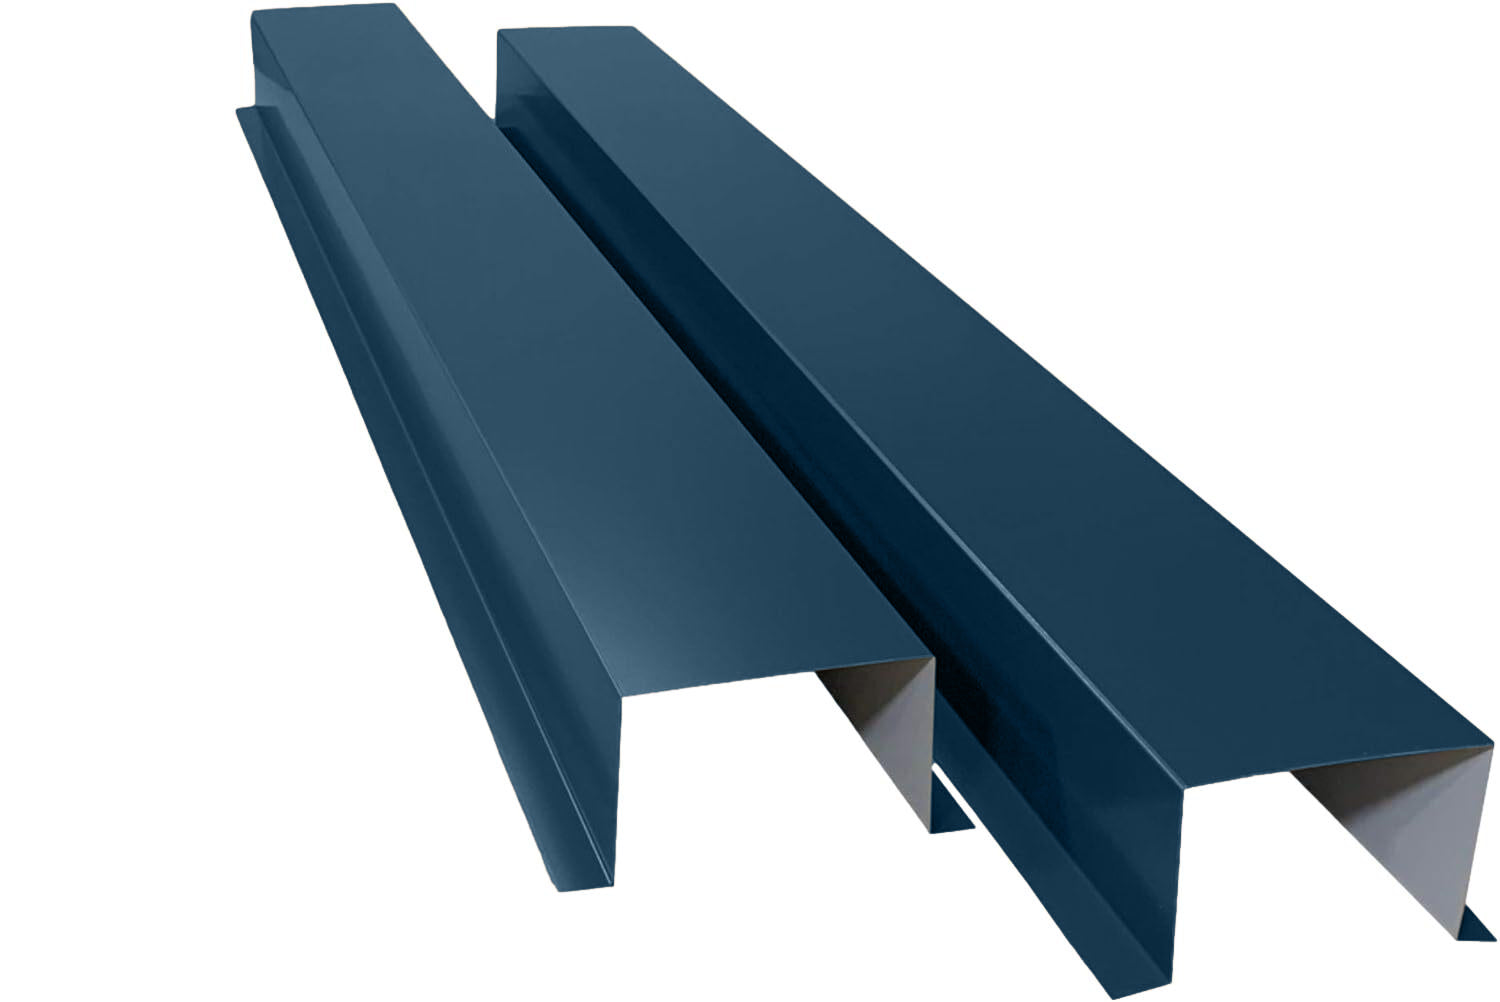 Two blue metal flashing pieces are shown, each rectangular in shape with a 90-degree bend. Made from 24 gauge painted metal, these parallel pieces boast a glossy finish and serve as part of the Perma Cover Commercial Series - 24 Gauge Painted Metal HVAC Line Set Covers - Heavy Duty, Multiple Sizes & Colors for enhanced HVAC line protection.